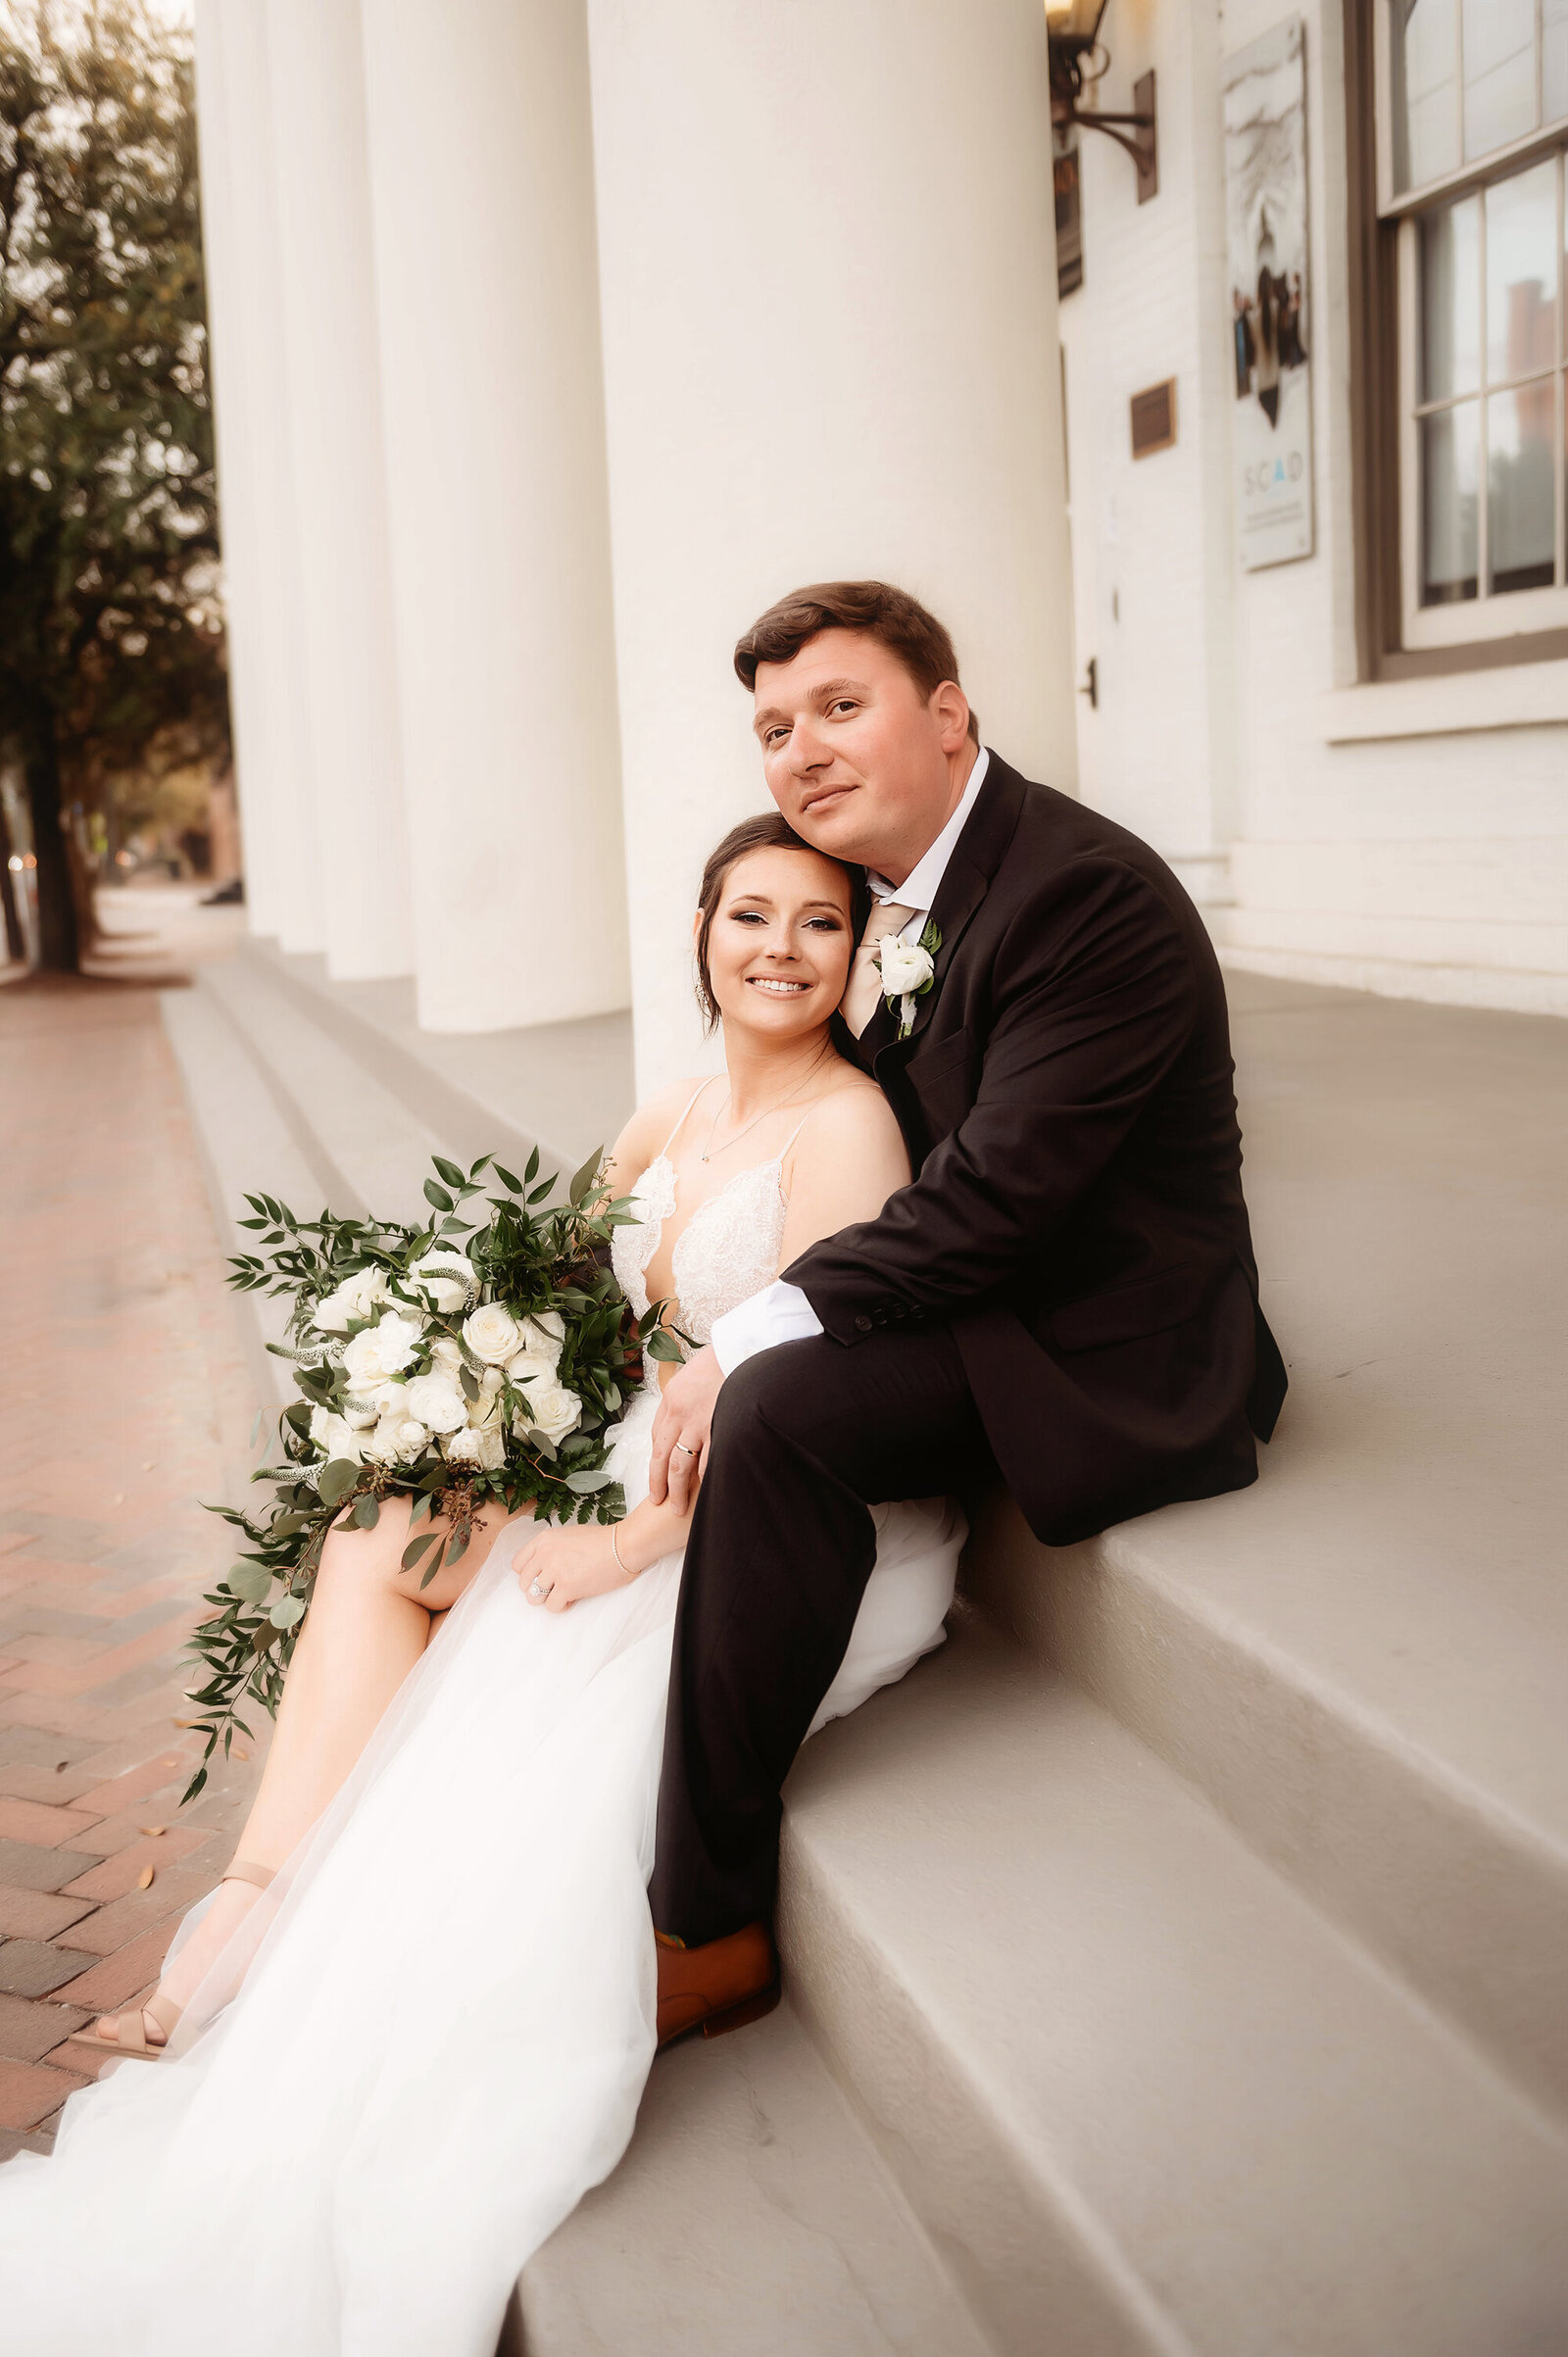 Newlyweds pose for portraits after their Micro Wedding in Savannah, Georgia.